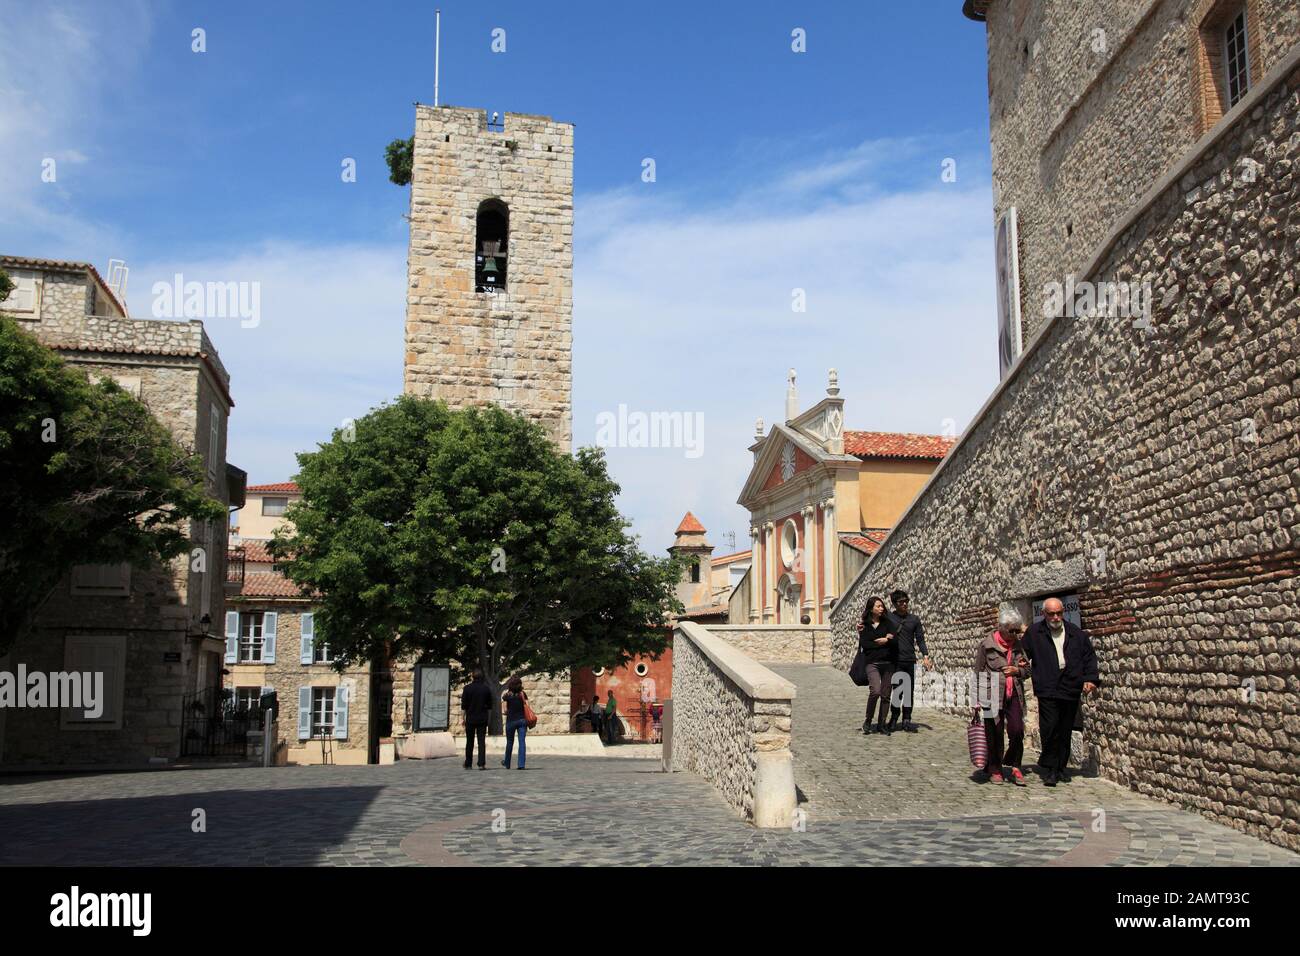 Old Town, Vieil Antibes, Antibes, Alpes-Maritimes, Cote d'Azur, French Riviera, Provence, France, Europe Stock Photo